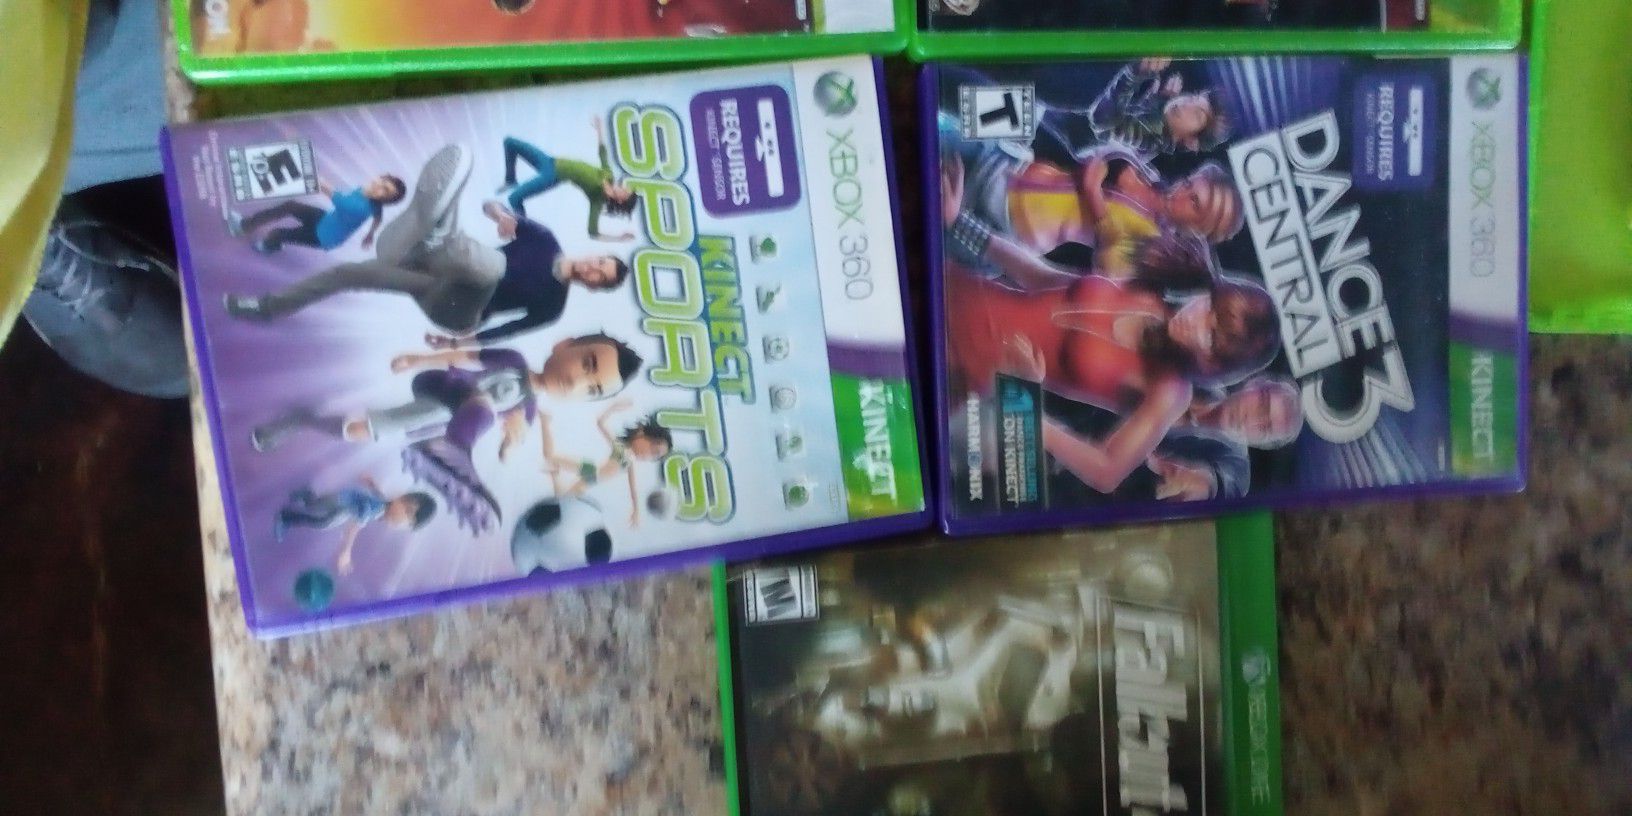 Xbox 360 games and extra mis stuff